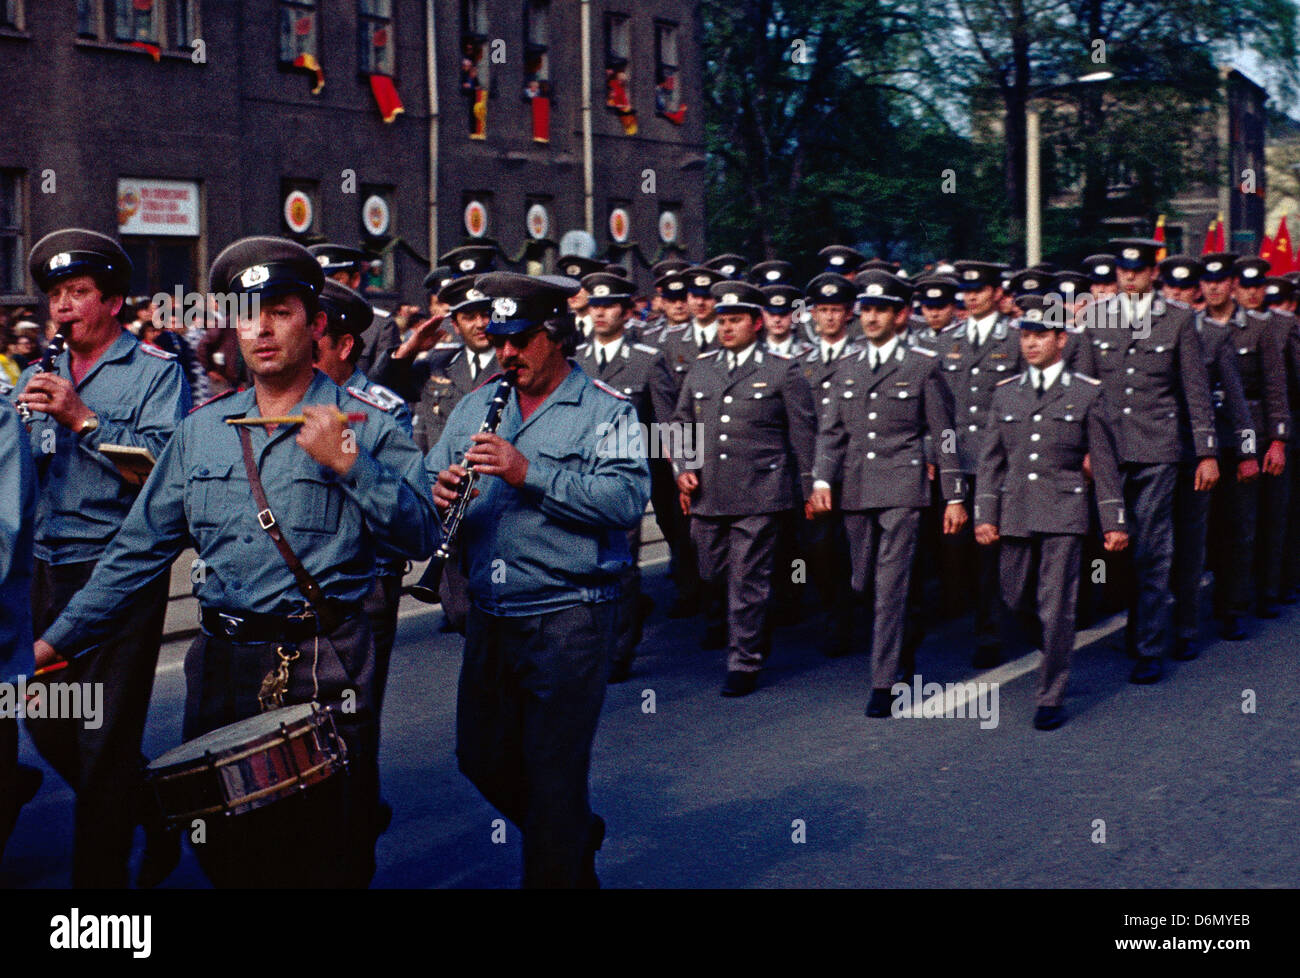 Gotha, East Germany, People's Police Orchestra and NVA soldiers in the procession to the 1200th anniversary of the city of Gotha Stock Photo